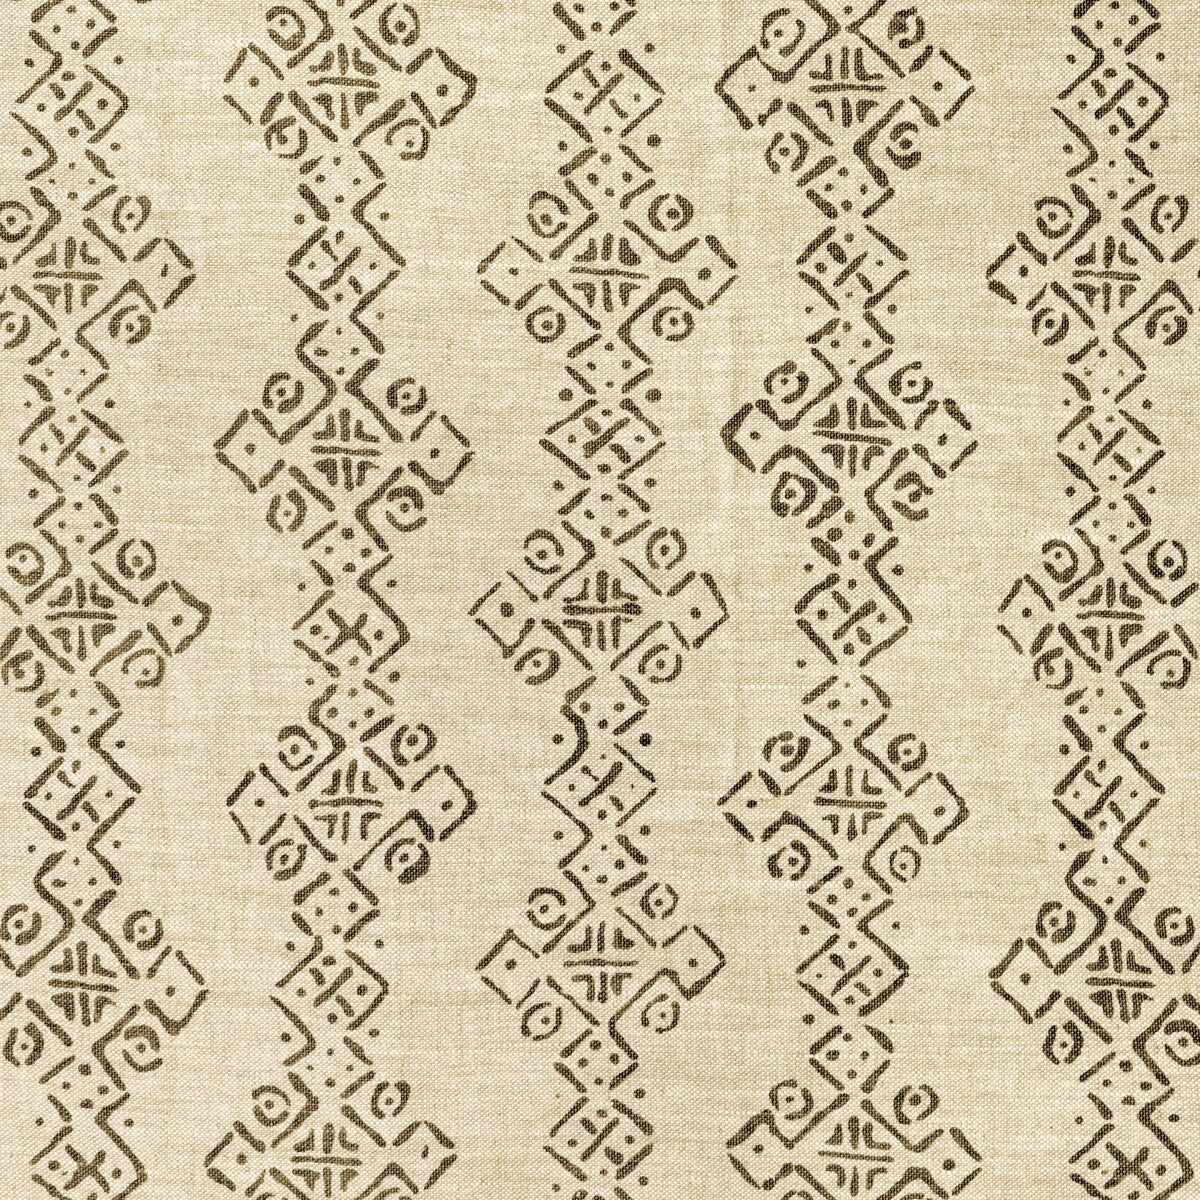 Mali fabric in stone color - pattern BFC-3674.166.0 - by Lee Jofa in the Blithfield collection